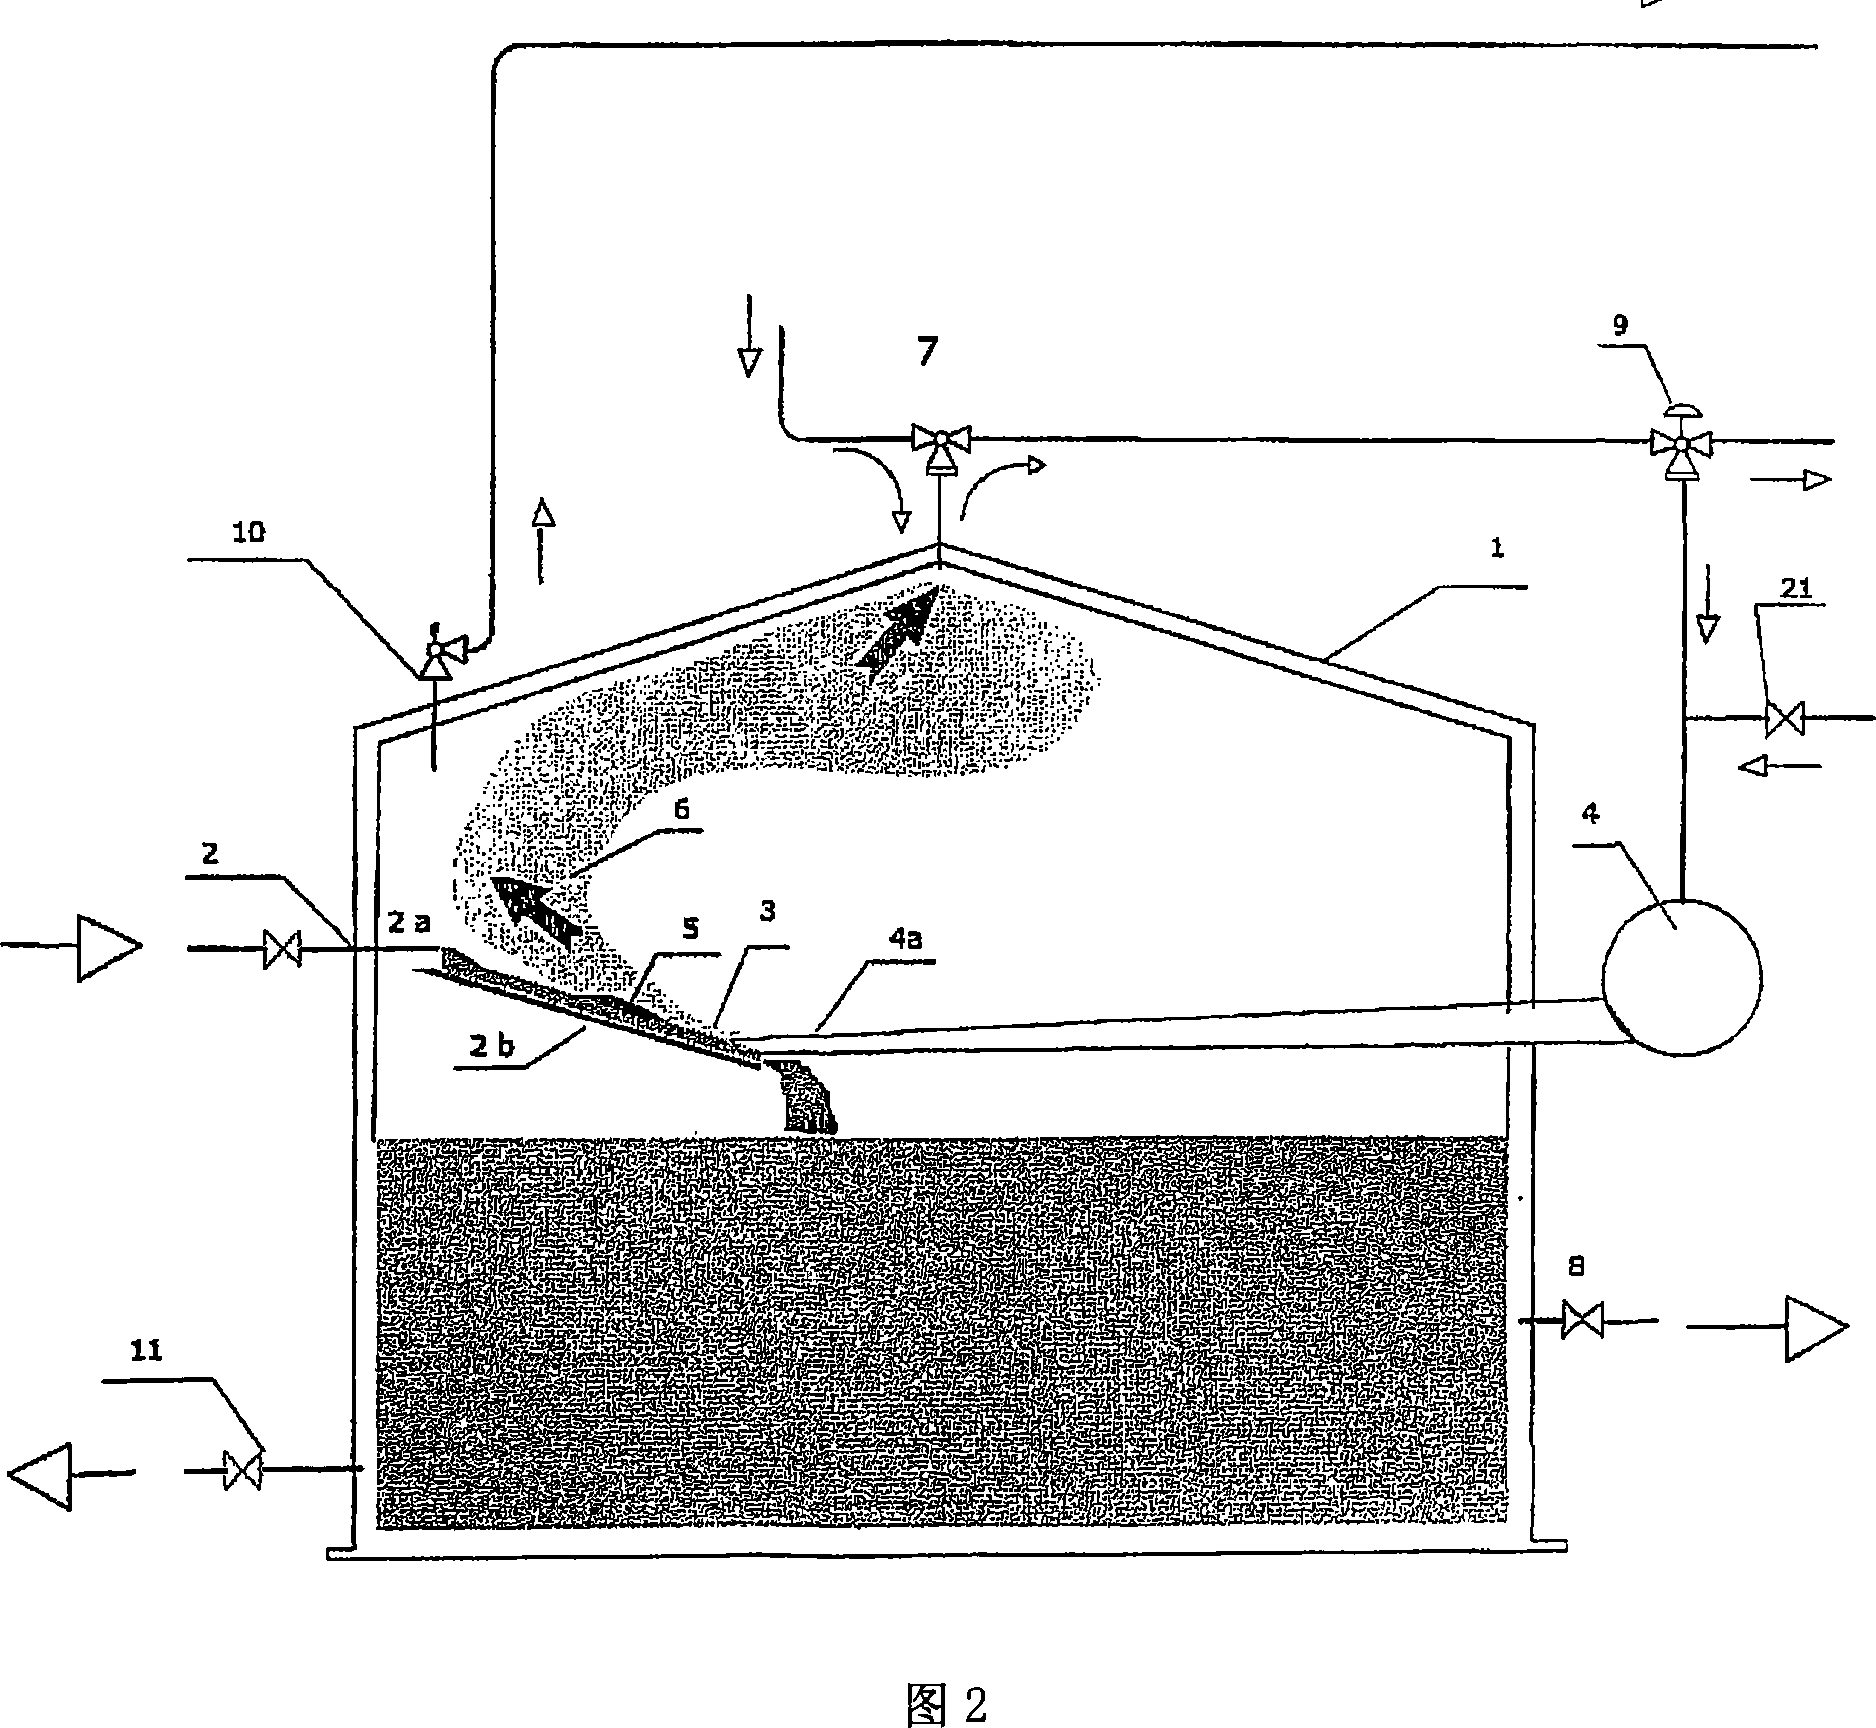 Process and device for separation of liquids emulsified in mixtures of liquids and gases dissolved in mixtures of liquids and gases by localized pressure reduction